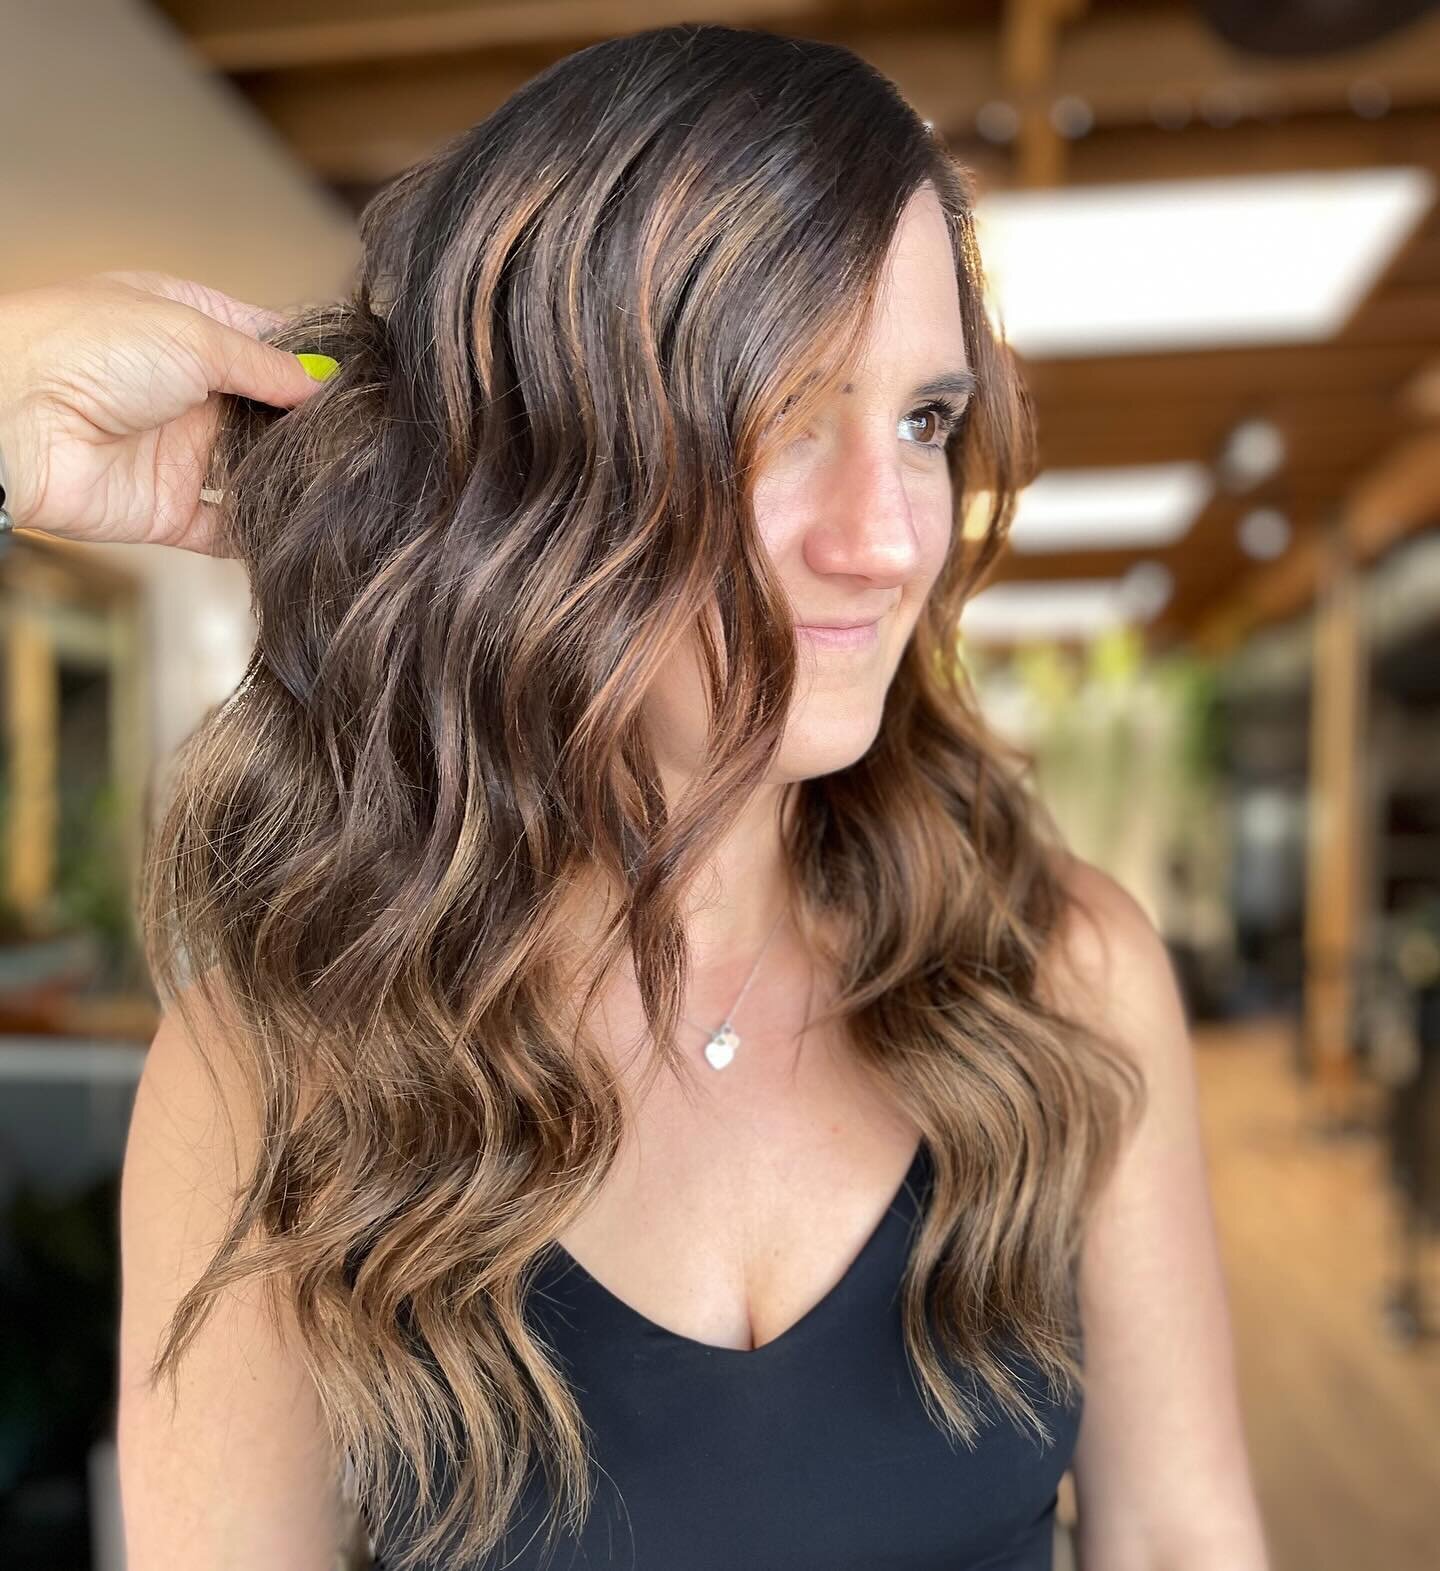 Seeing a new stylist is so damn scary!! ⁠😱
⁠
Even as a stylist, it&rsquo;s hard to put your trust in someone new especially with a big investment like extensions $$. It&rsquo;s just like a first date. Very nerve wracking⁠🥴
⁠
Will I like them? Will 